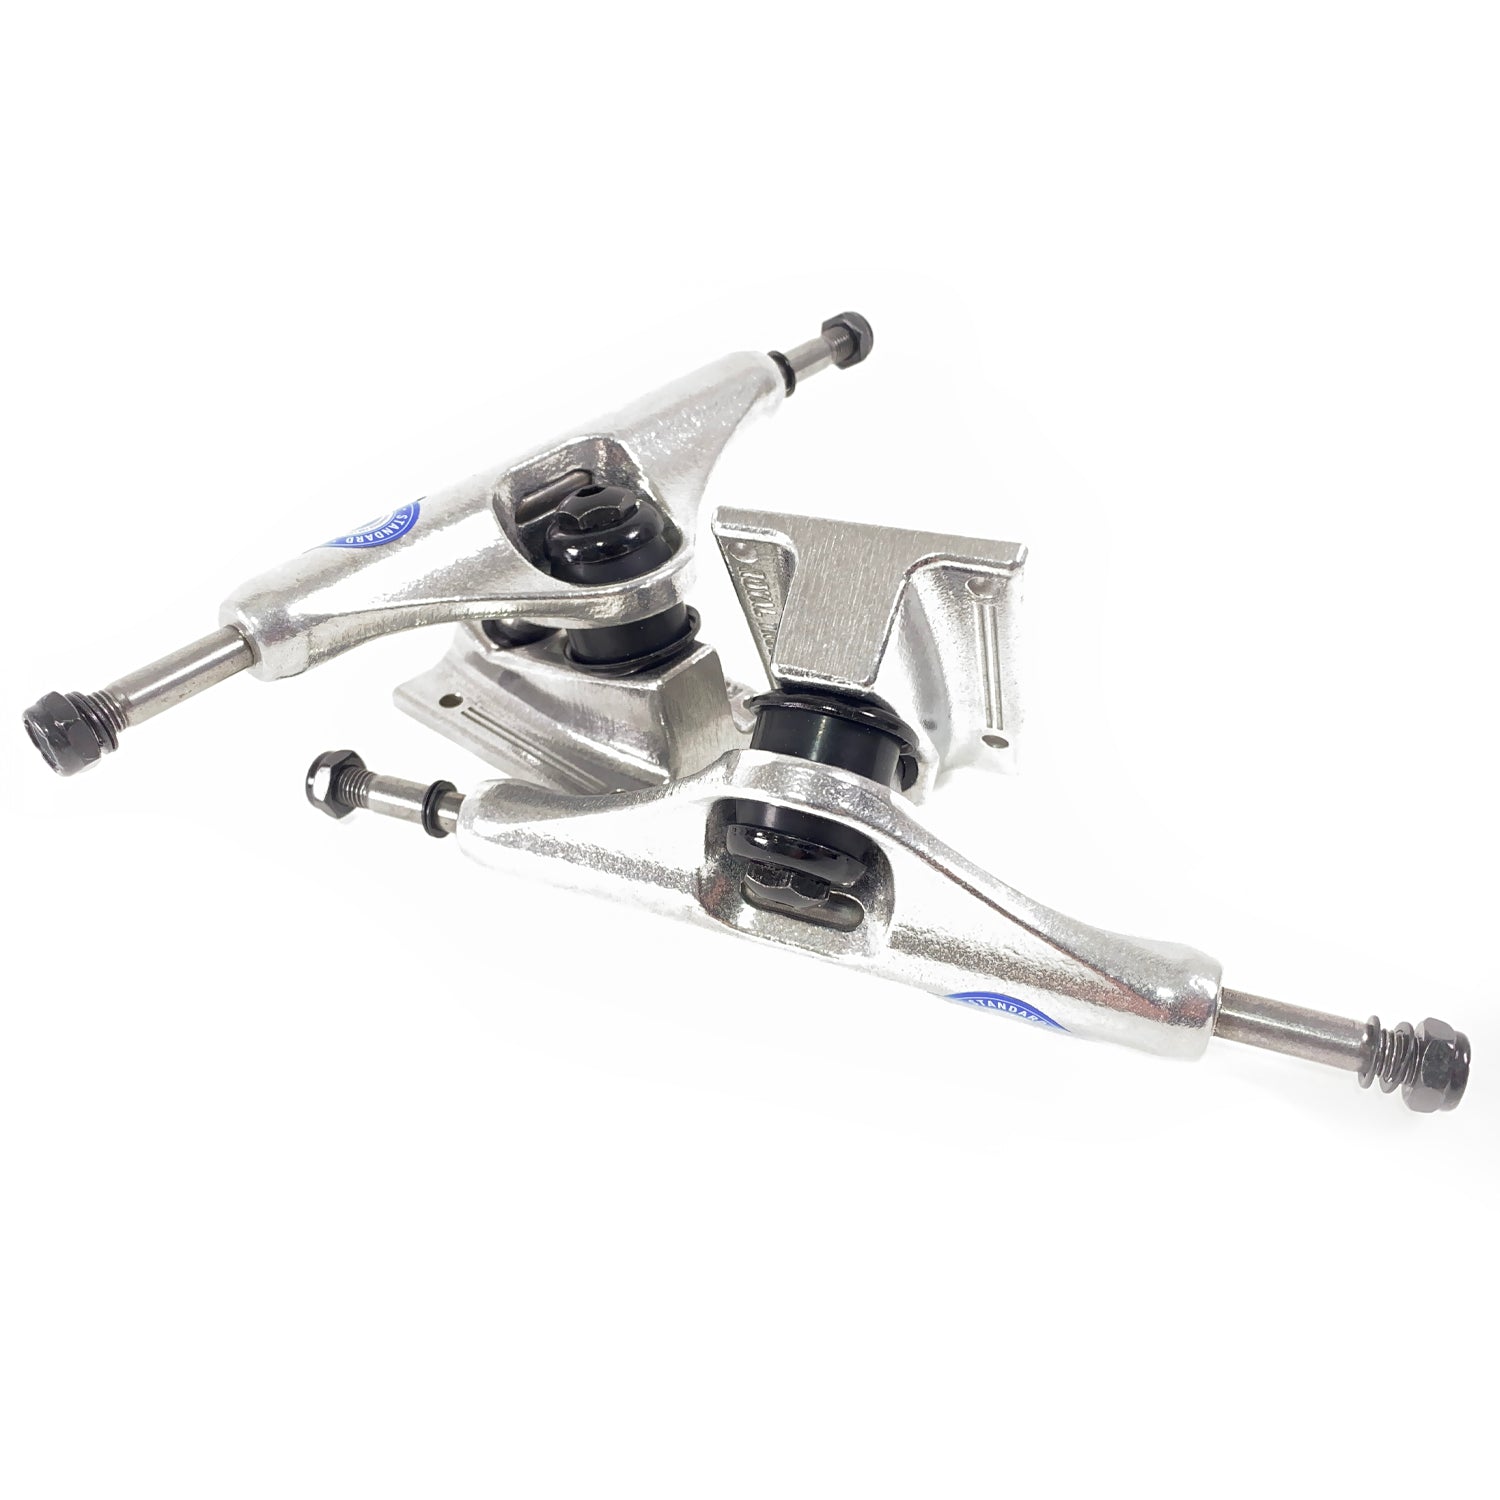 Royal Skateboard Truck with Inverted Kingpin 5.0 (7.75) - Raw Silver (Sold as a pair) - Prime Delux Store